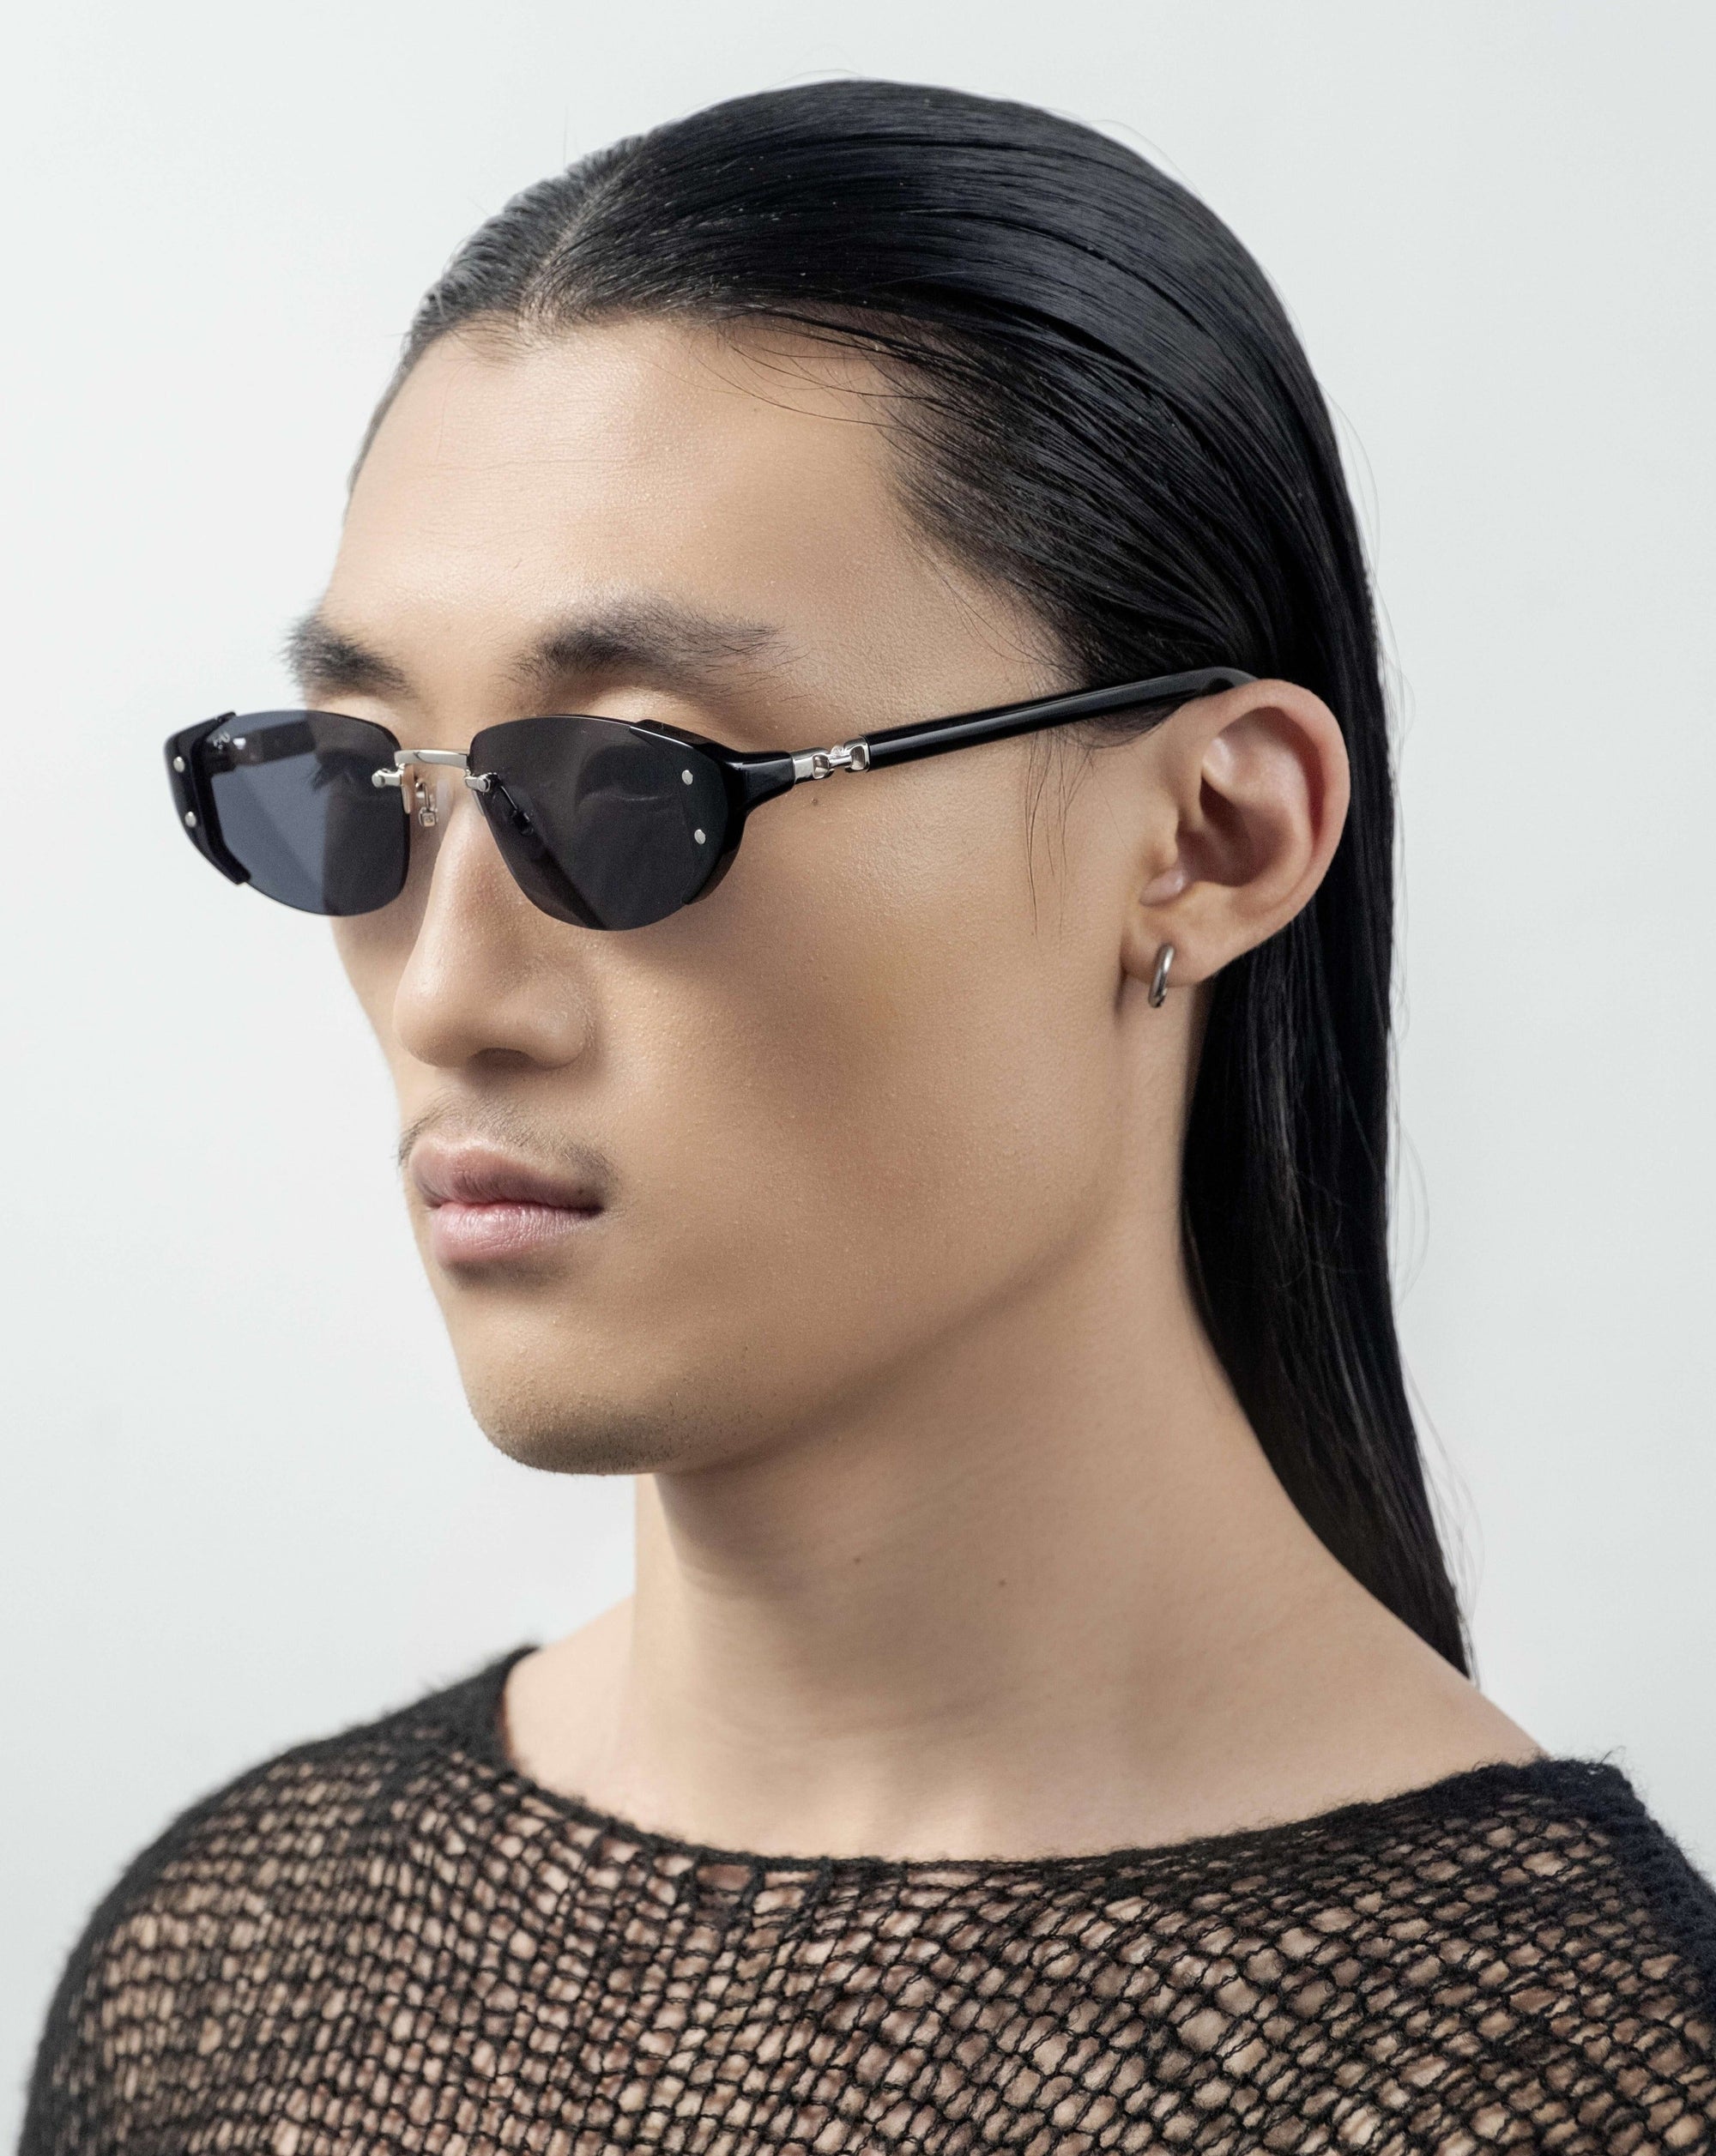 A person with long, sleek black hair and wearing For Art&#39;s Sake® Harbour sunglasses with a retro-inspired design looks to the side. They have a small hoop earring in one ear and are dressed in a textured, black mesh top. The background is plain white.